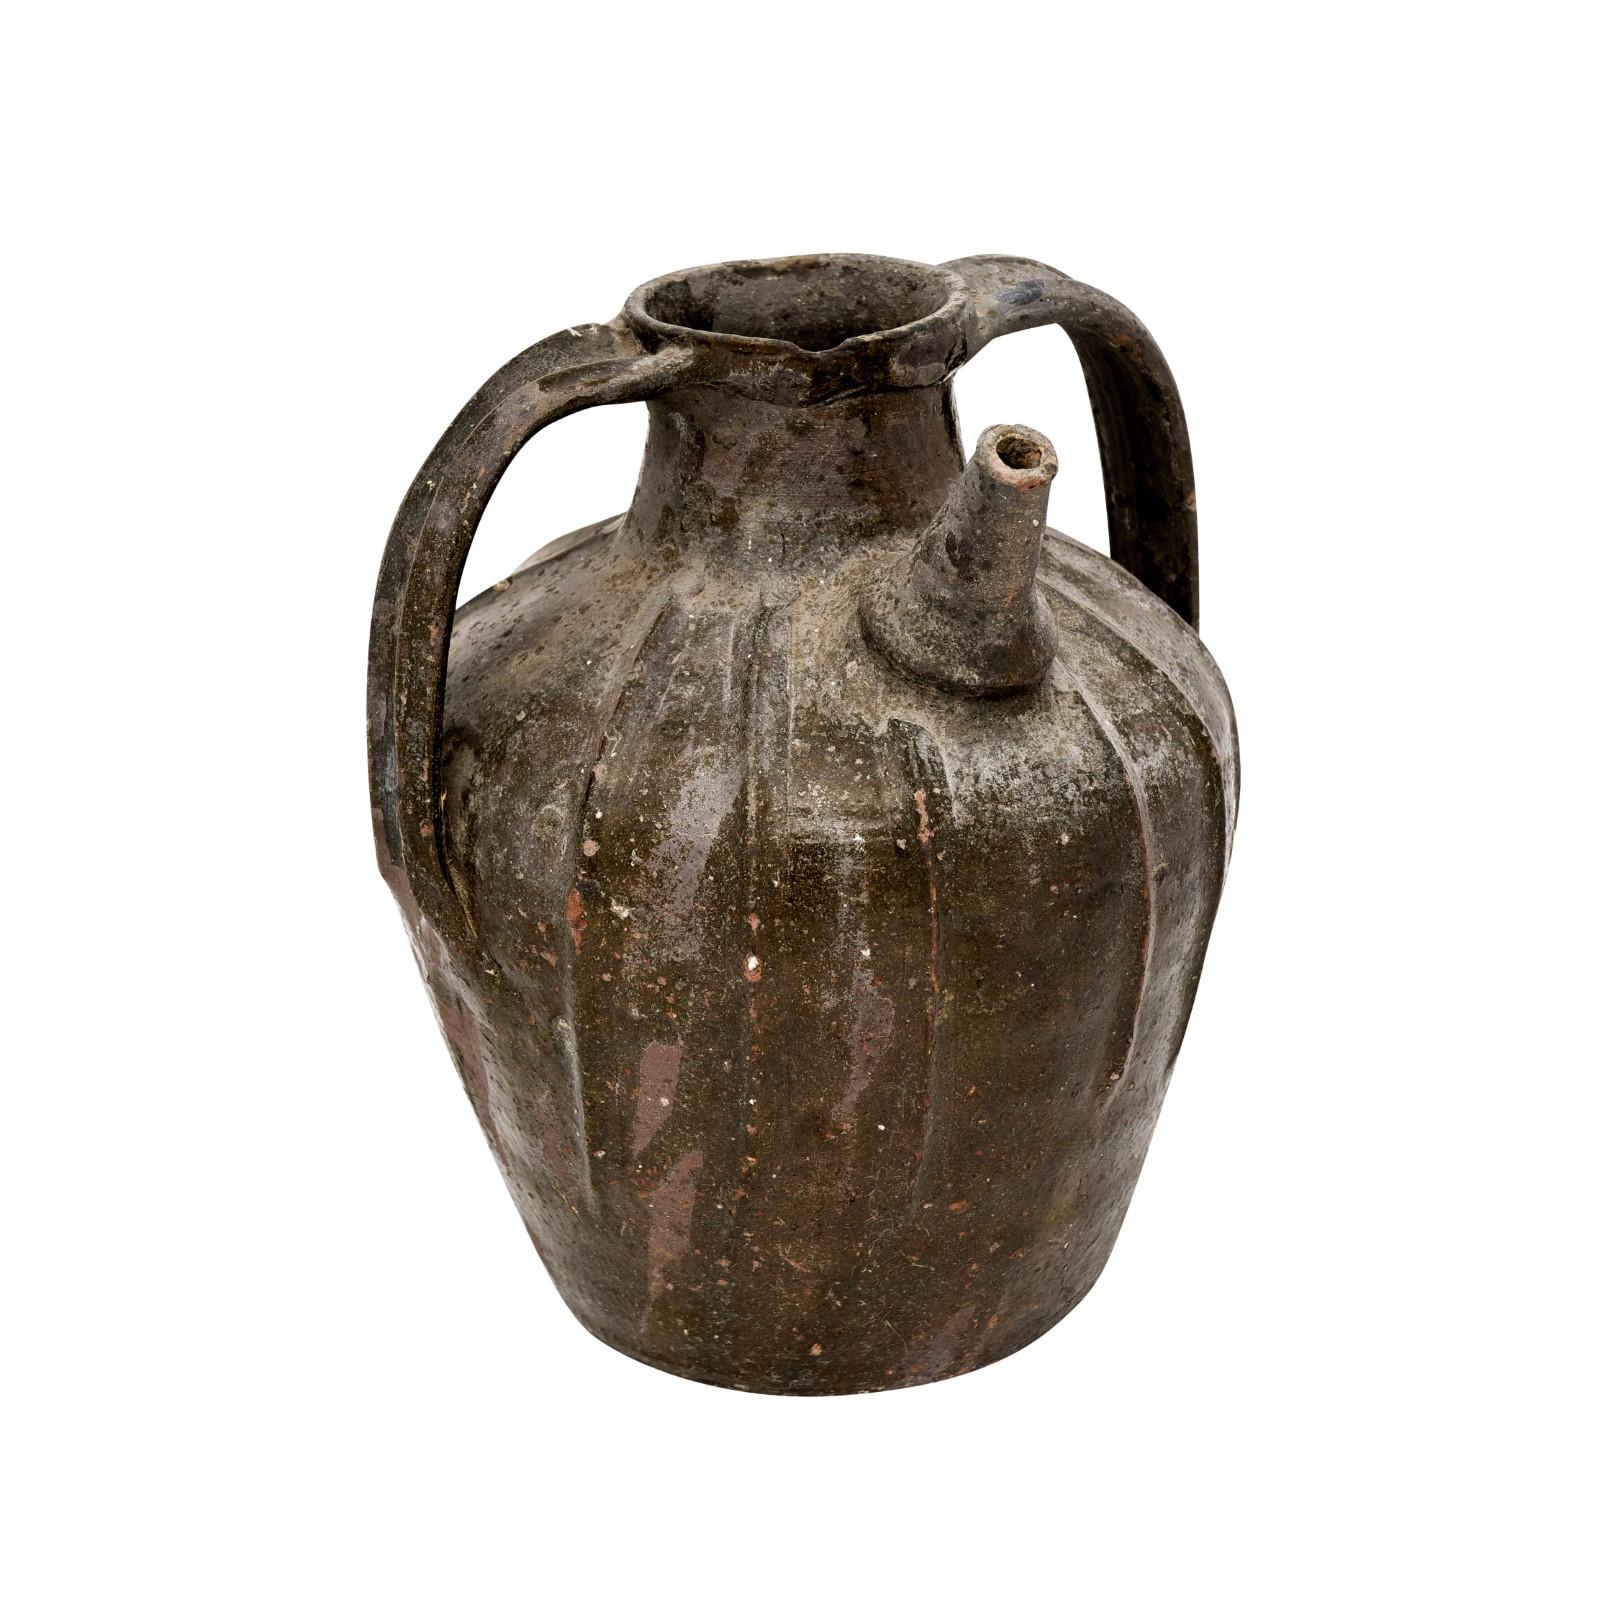 A French Provincial glazed pottery pouring jug from the 19th century, with single spout, two handles and great rustic character. Created in southern France during the 19th century, this pottery jug attracts our attention with its interesting